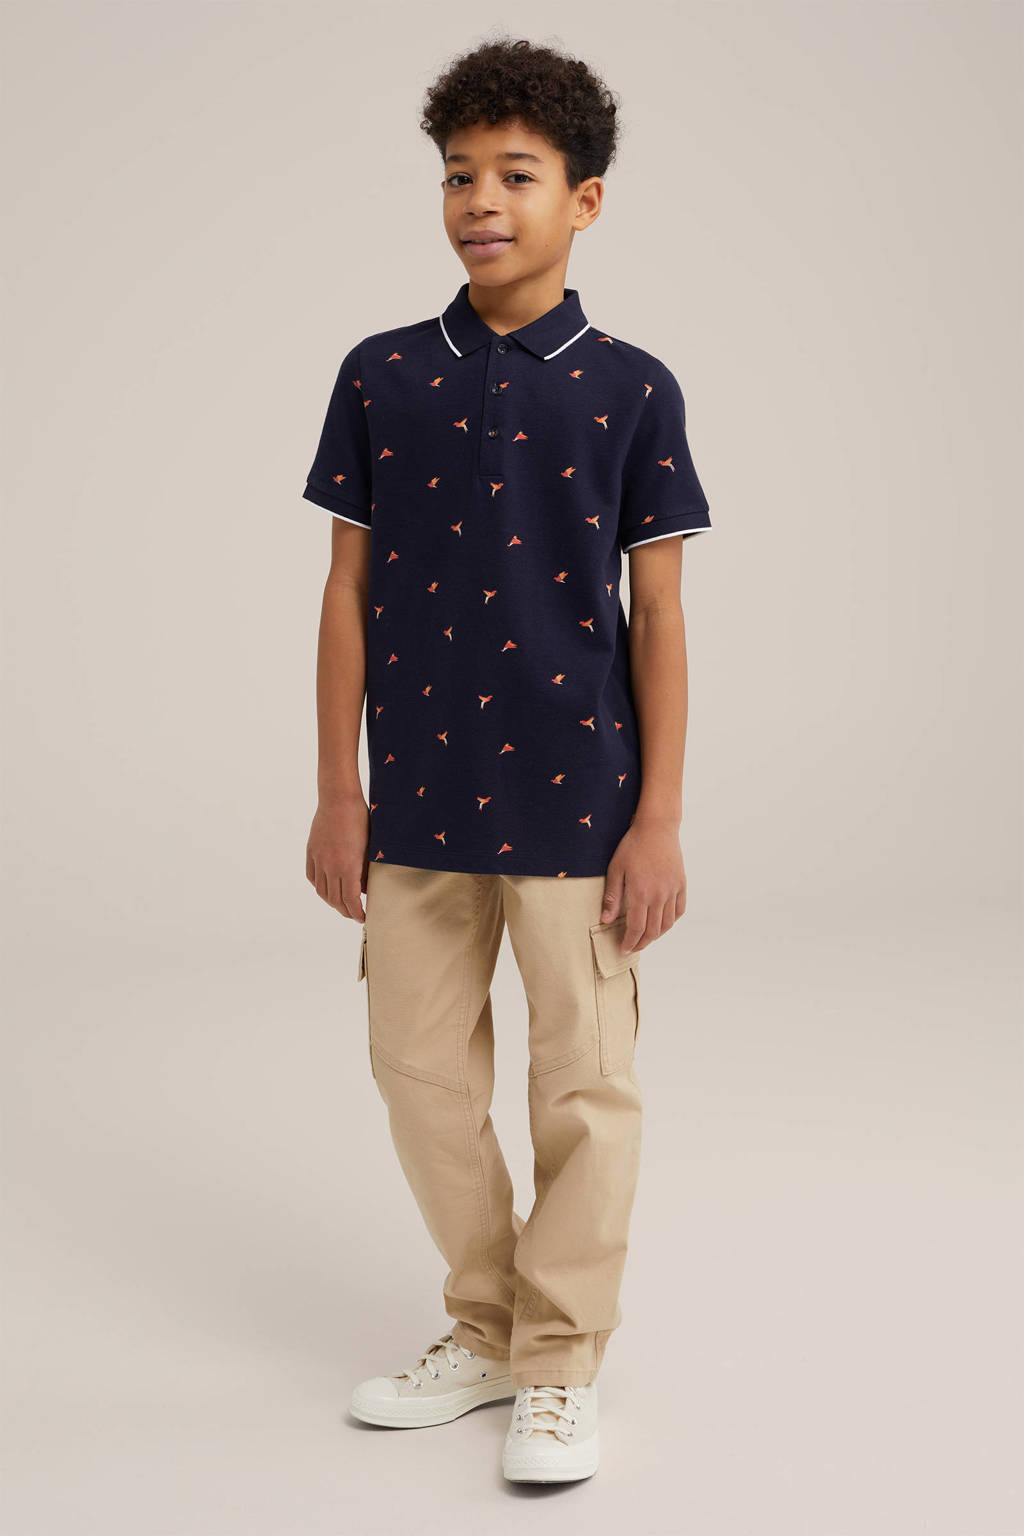 polo met all over print donkerblauw